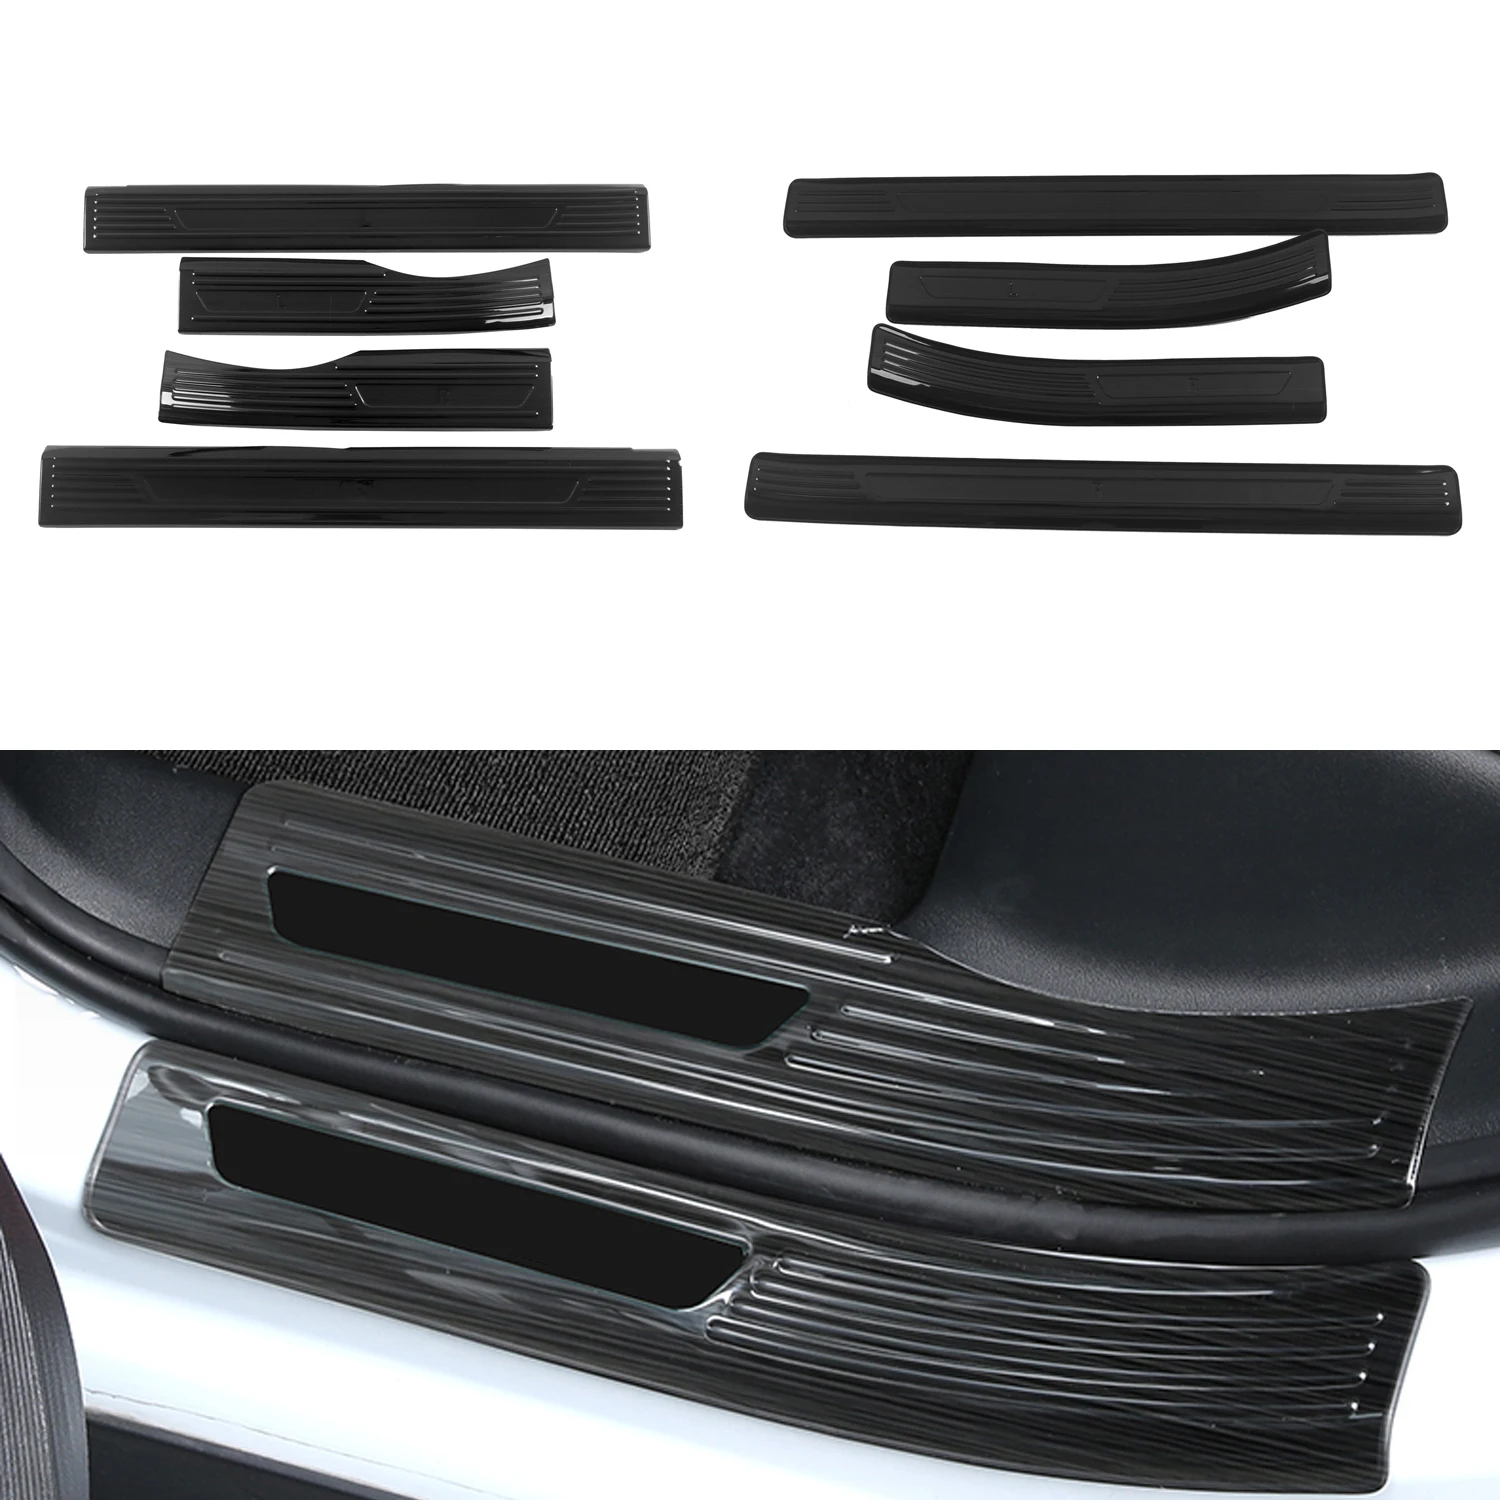 

for Volkswagen ID.3 2019-2023 Black Car Door Sill Protector Entry Guards Threshold Scuff Plate Welcome Pedal Cover 8pcs